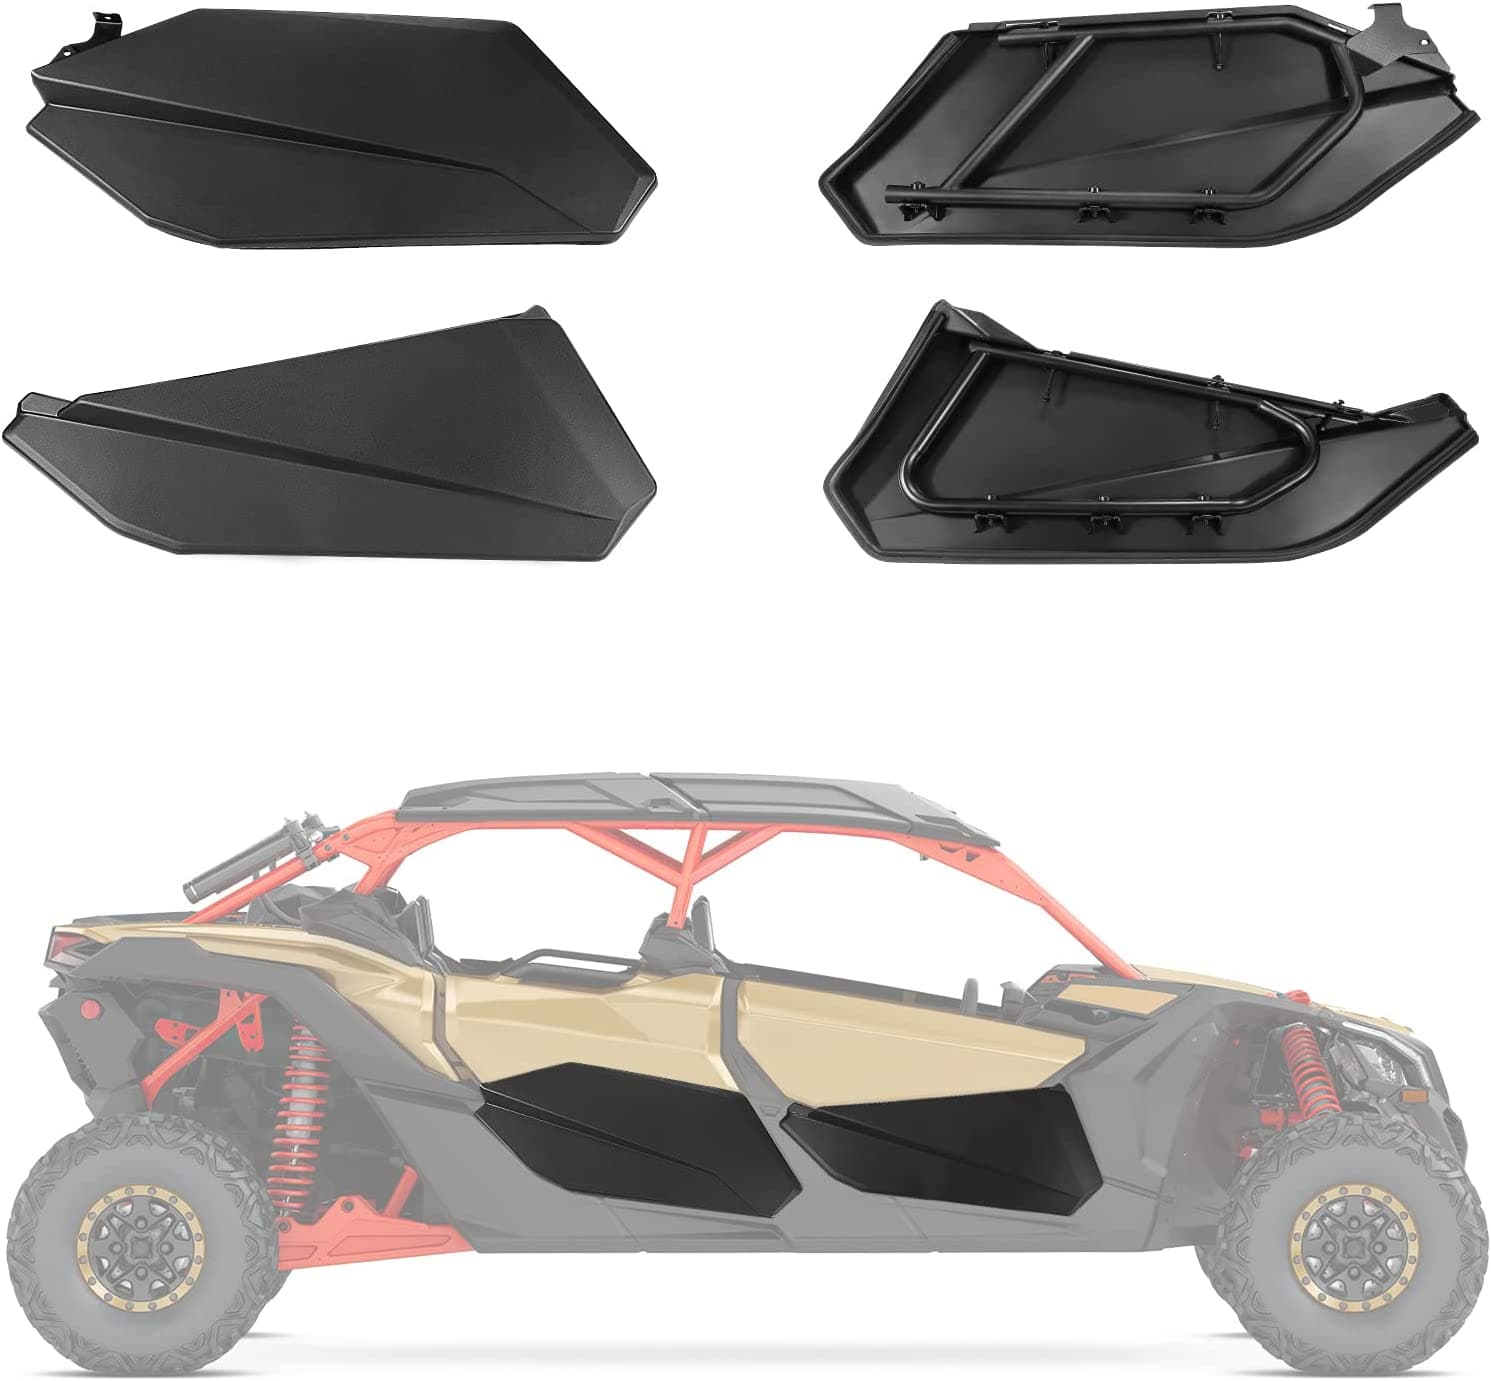 Soft Cab Enclosure and Lower Door Inserts for Can-Am Maverick X3 MAX - Kemimoto